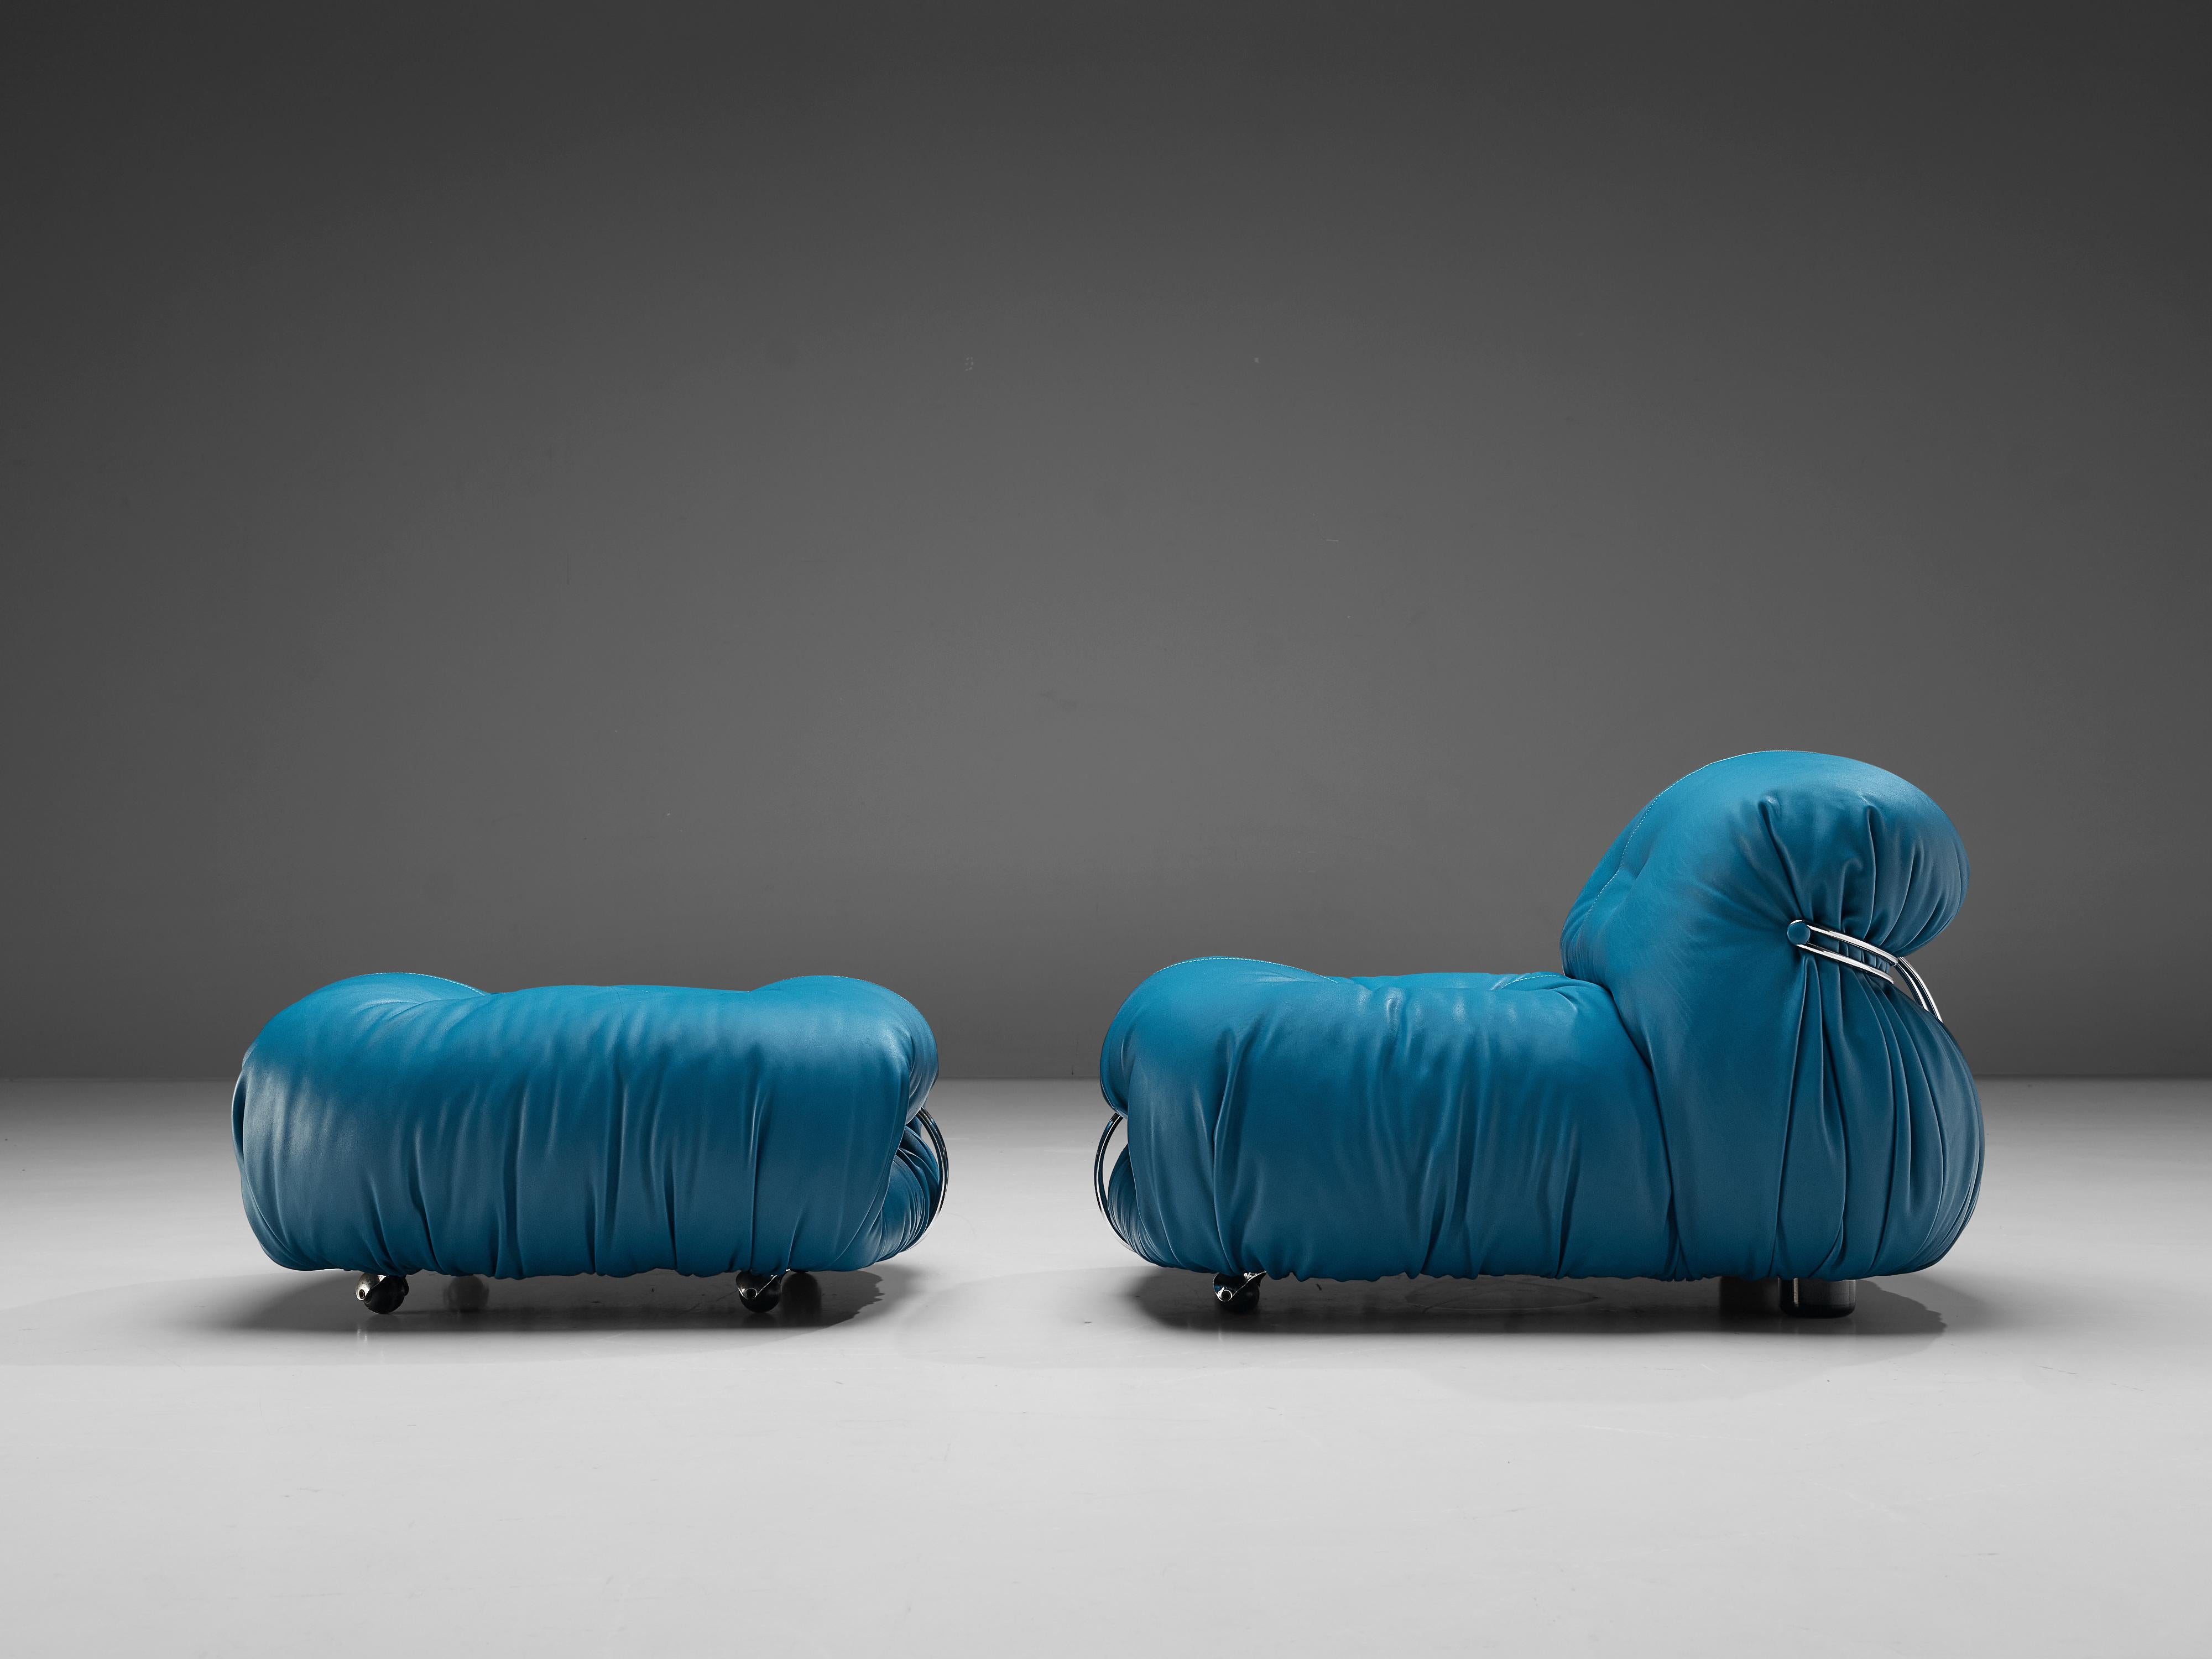 Afra & Tobia Scarpa 'Soriana' Lounge Chair with Ottoman in Blue Leather 2